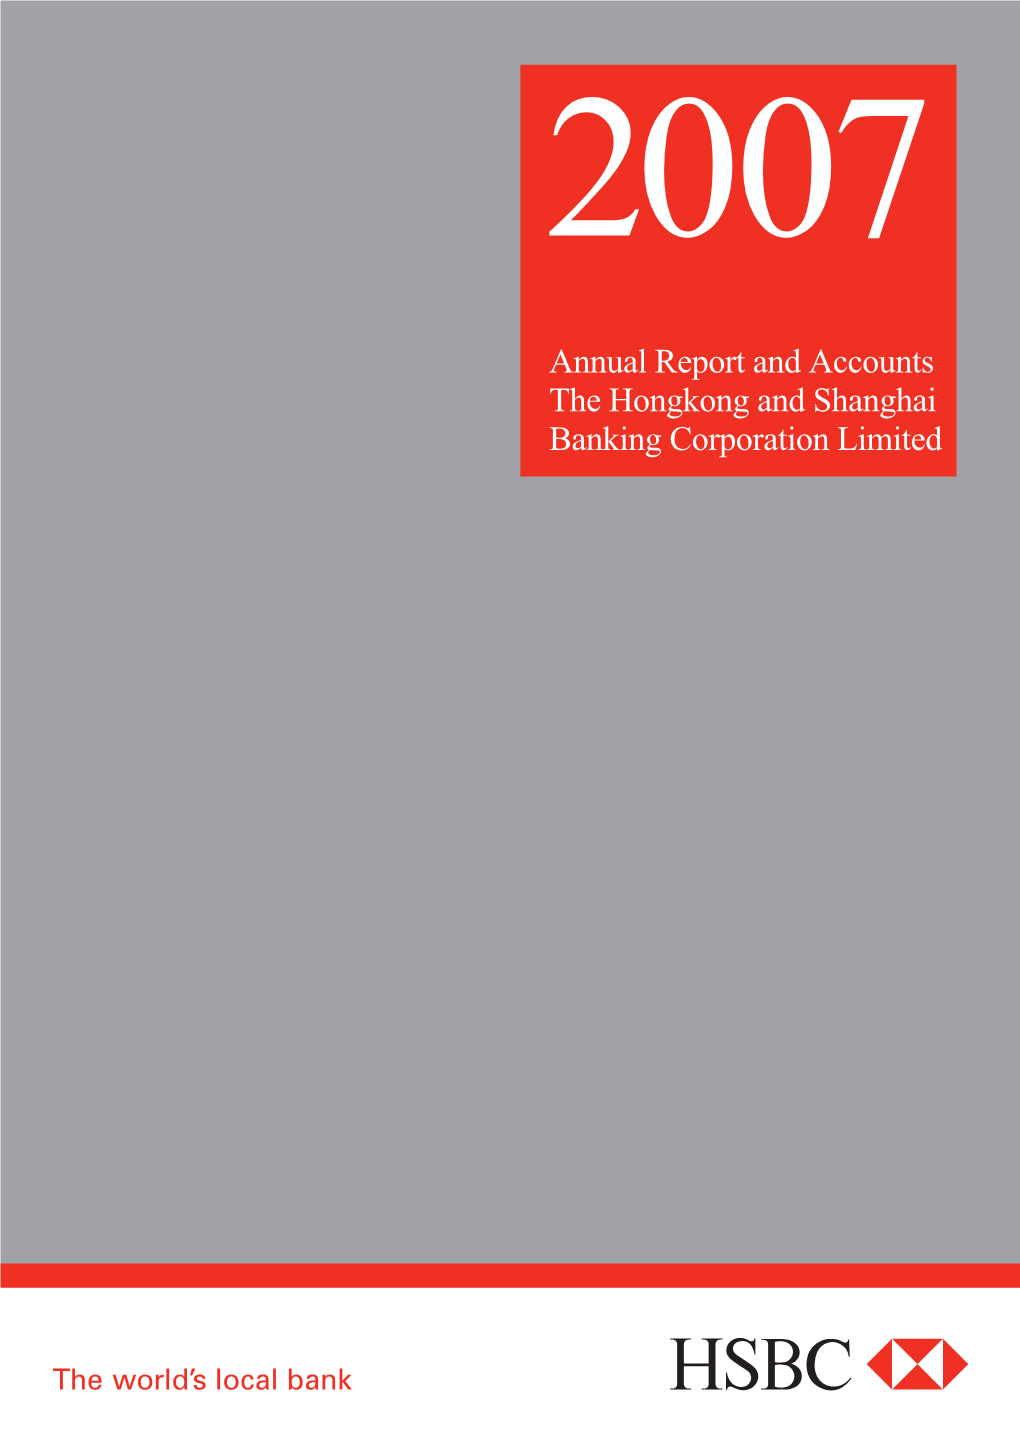 Annual Report and Accounts the Hongkong and Shanghai Banking Corporation Limited